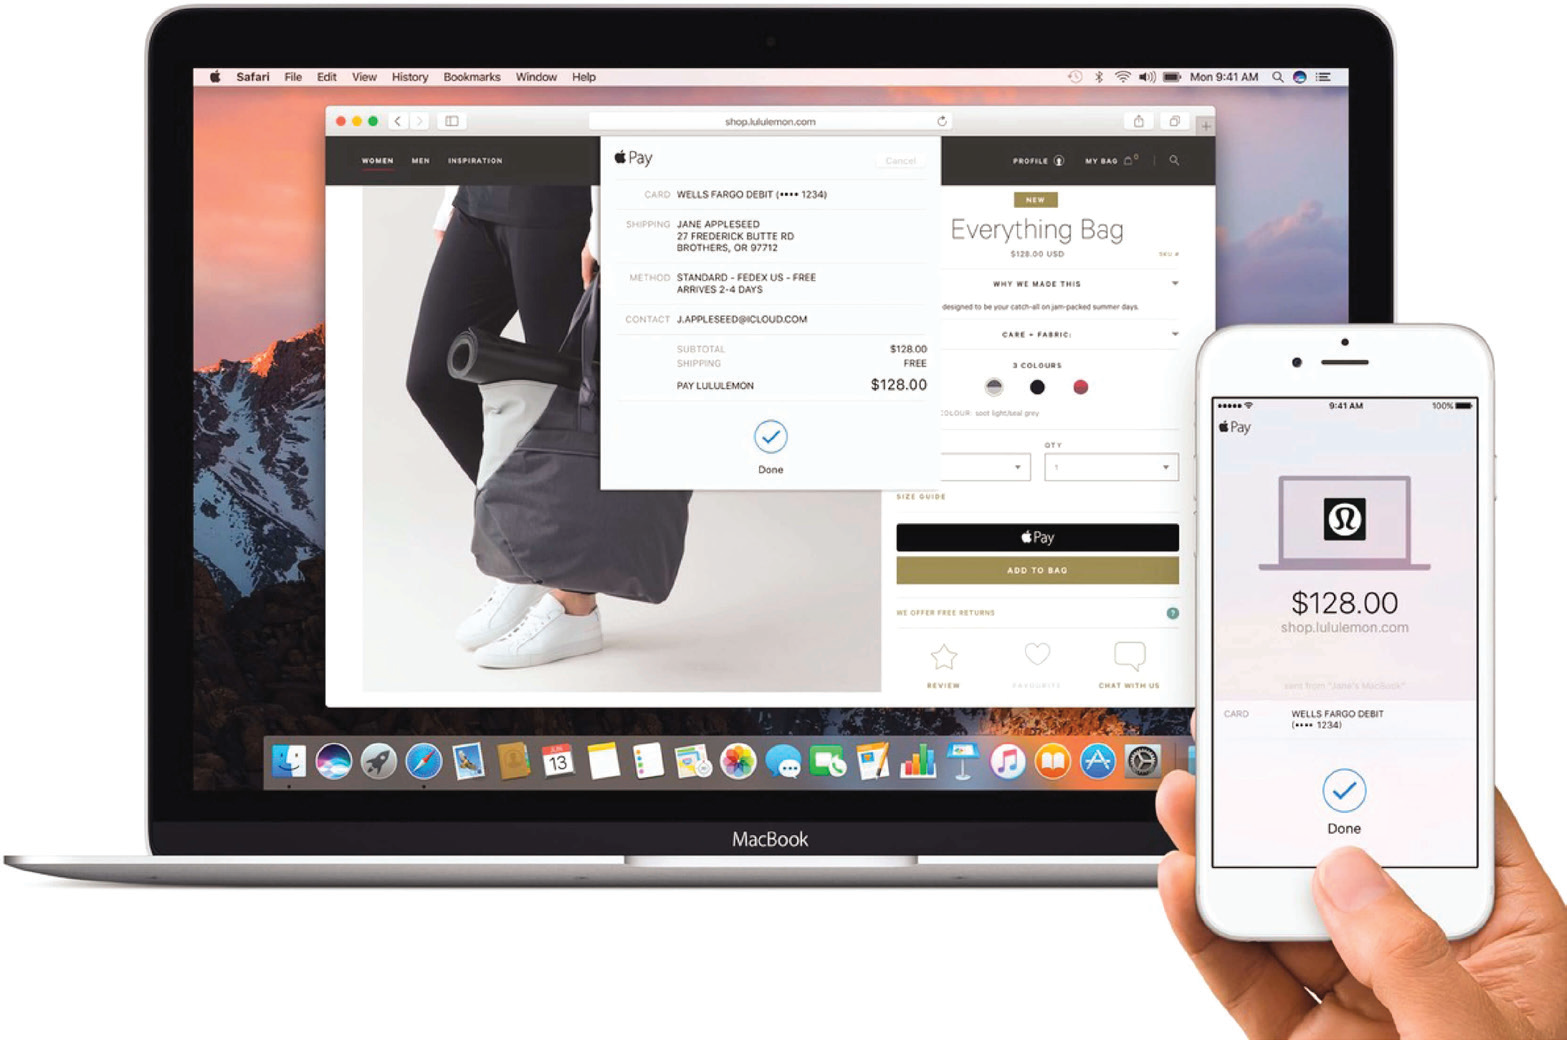 Apple Pay lets you use the fingerprint reader or Face ID on your phone to confirm purchases on your Mac. Crazy! The only trick now is finding websites that actually offer Apple Pay as a payment method.